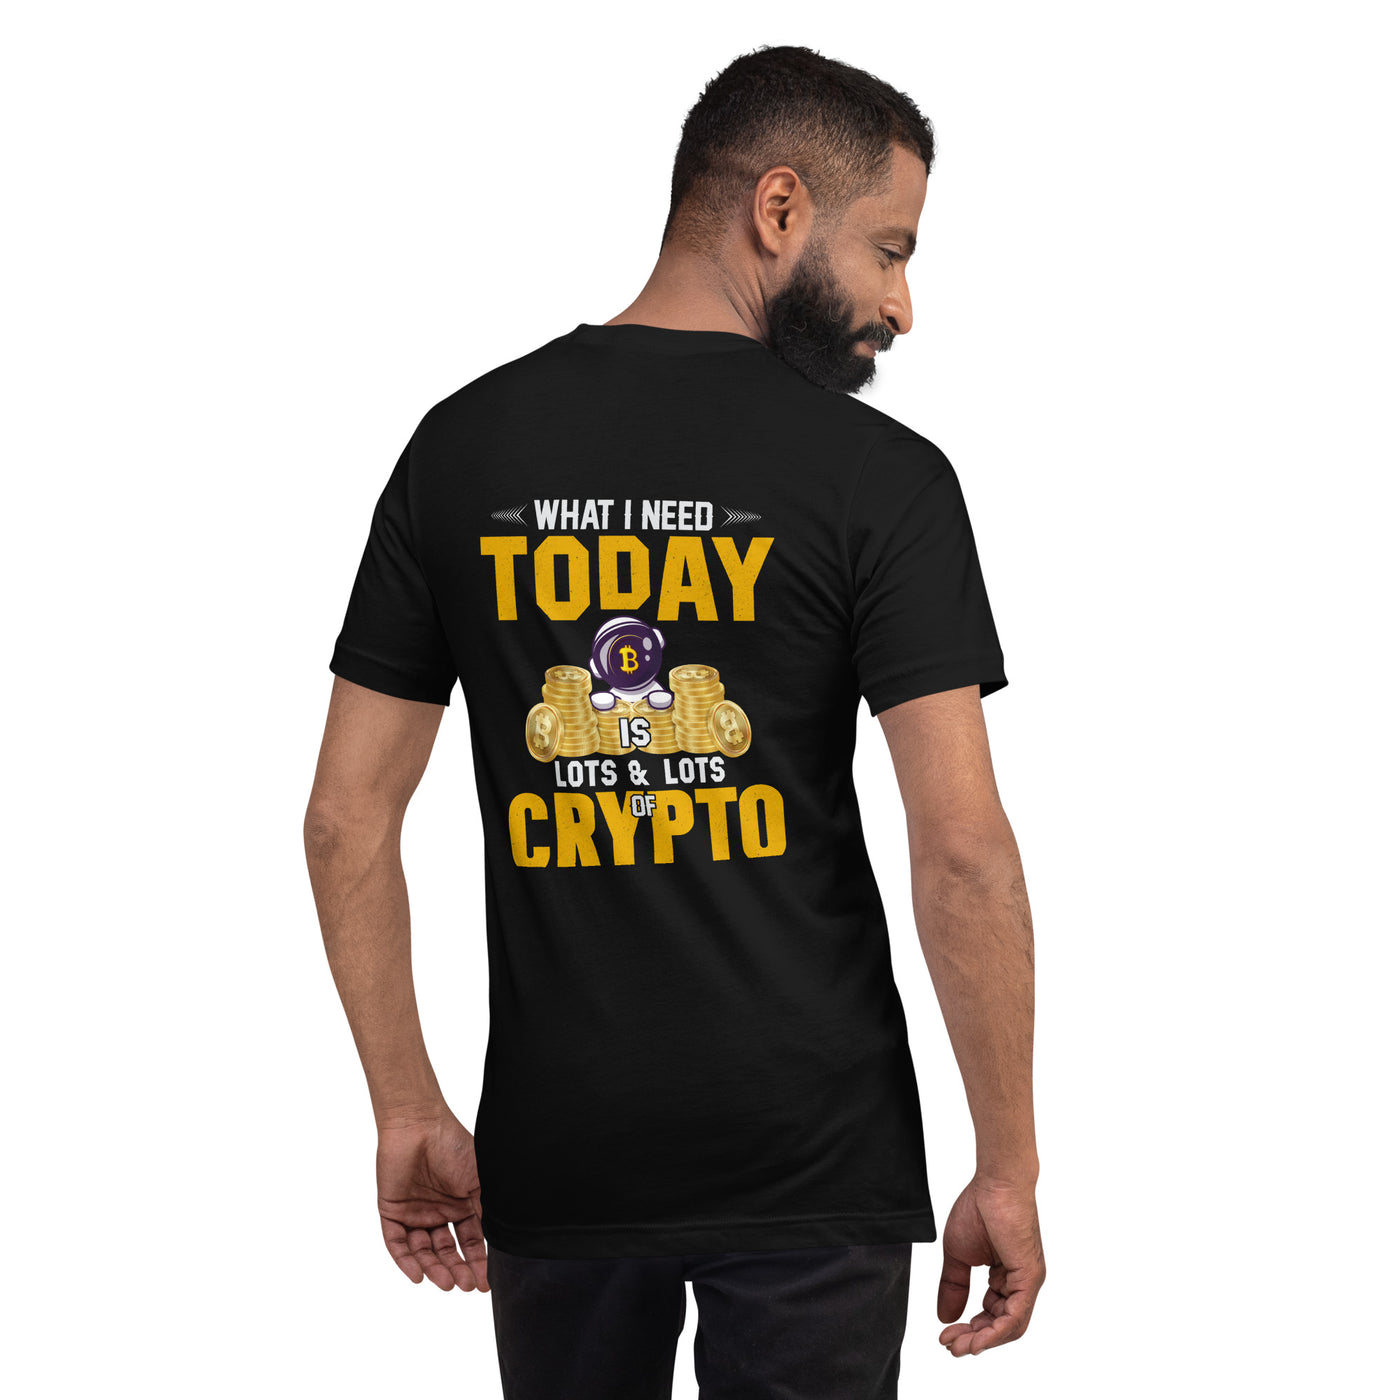 What I Need Today is Lots of Lots of Crypto Unisex t-shirt ( Back Print )